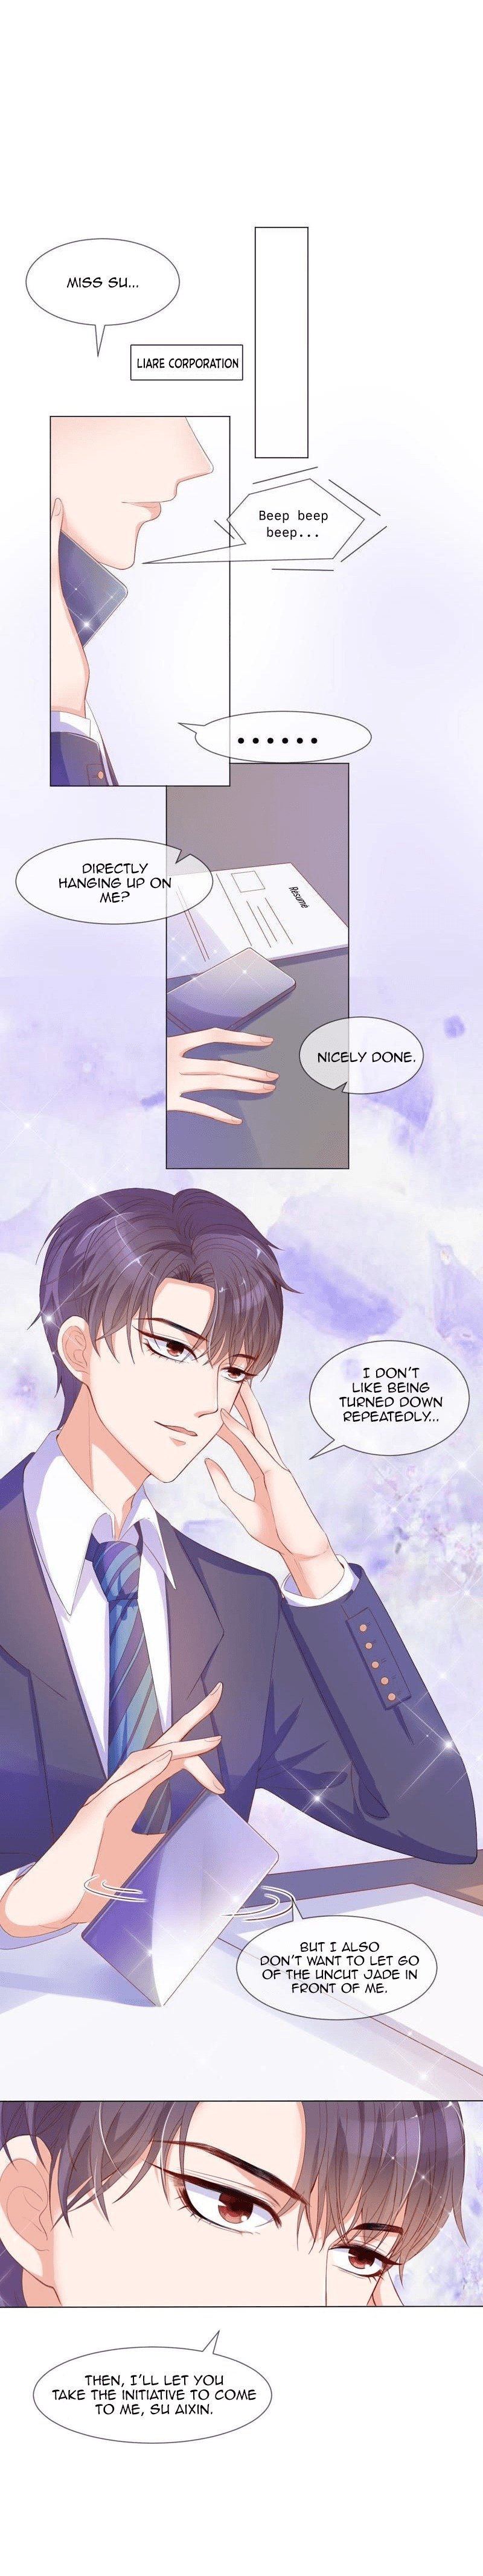 Prince Charming Has His Eyes on Me ch.9